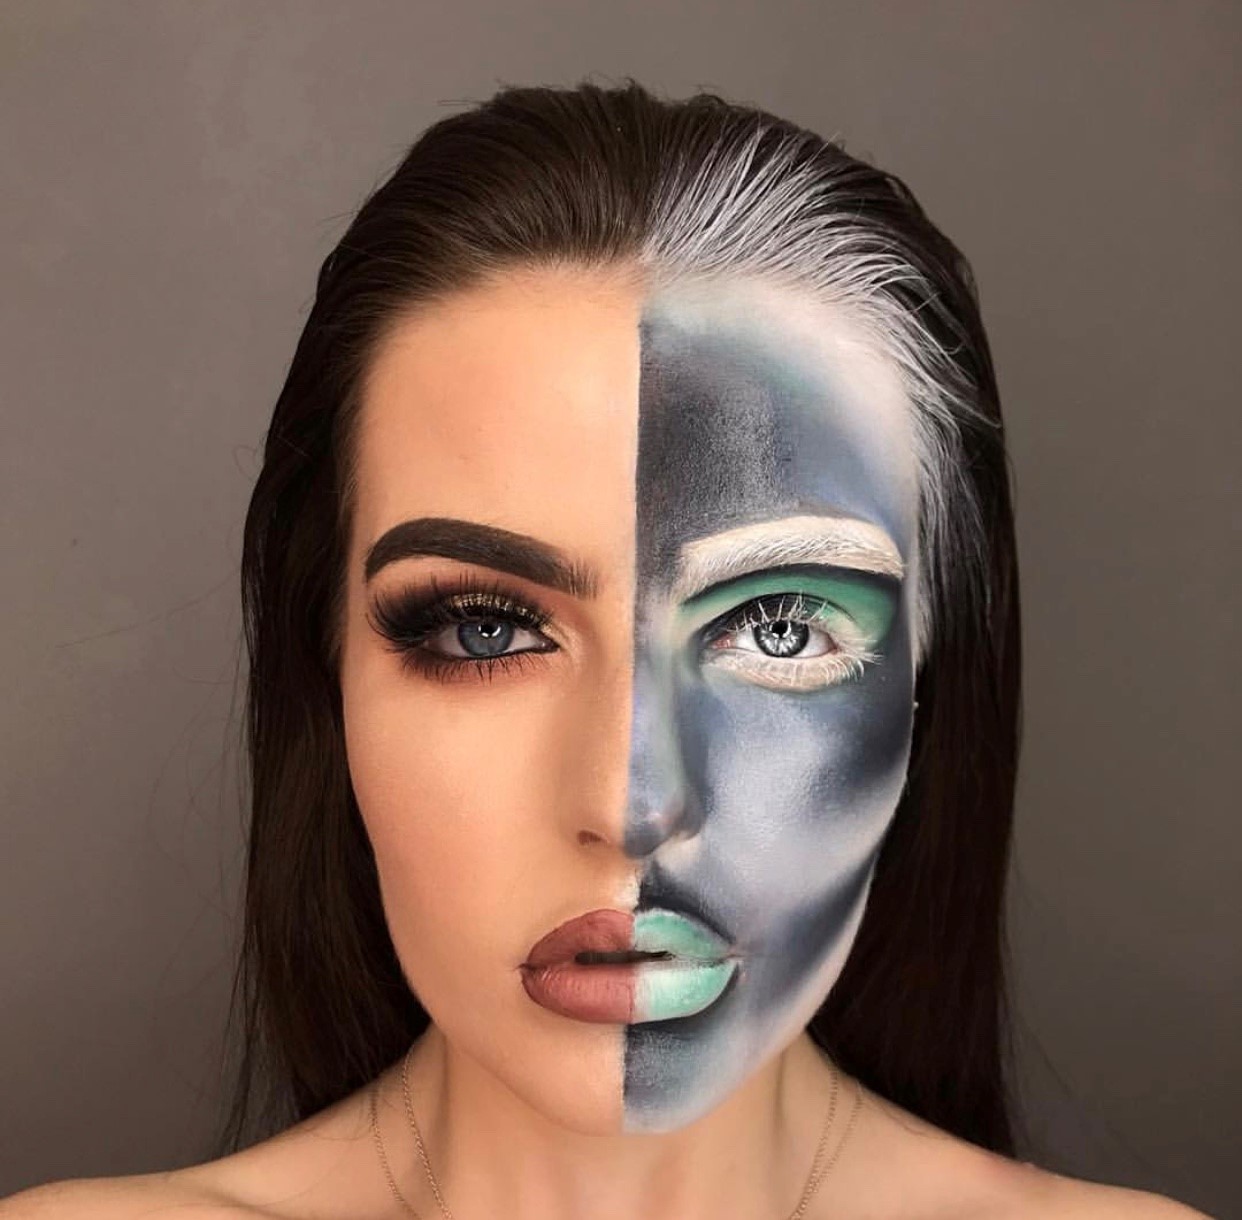 Inverted X-Ray make-up challenge 